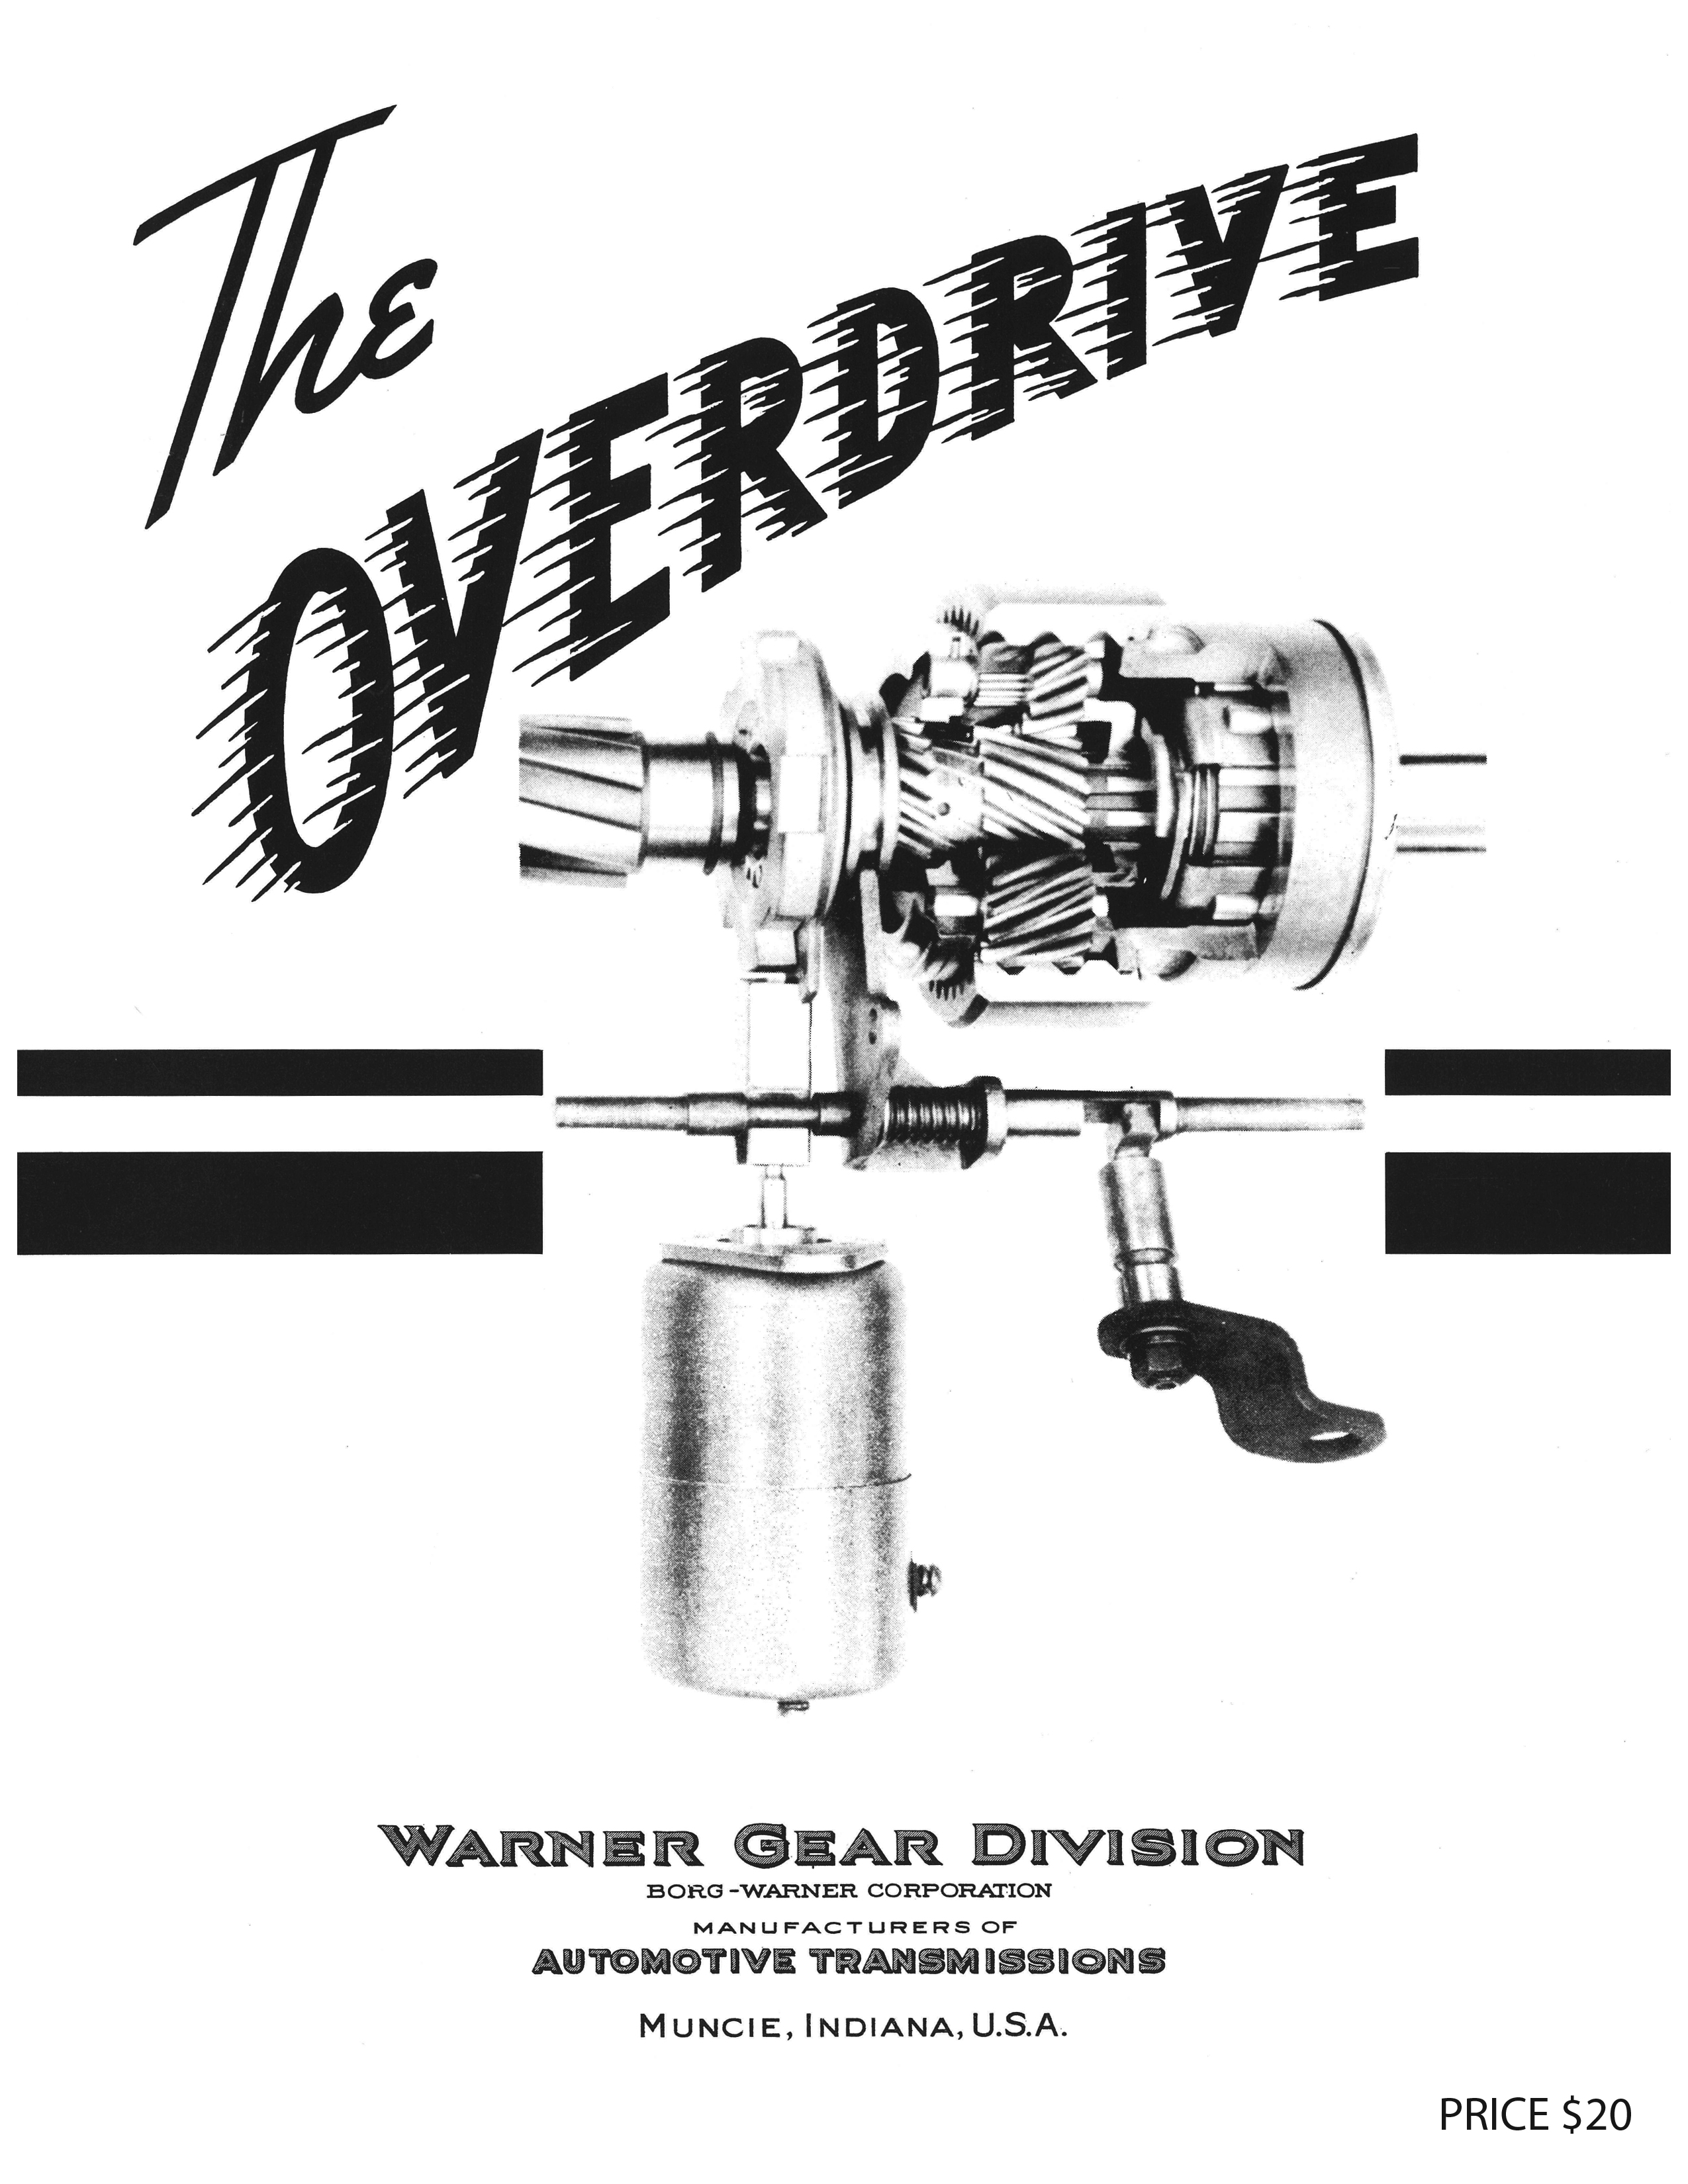 Getting Familiar with a Borg Warner Overdrive - Classic Car